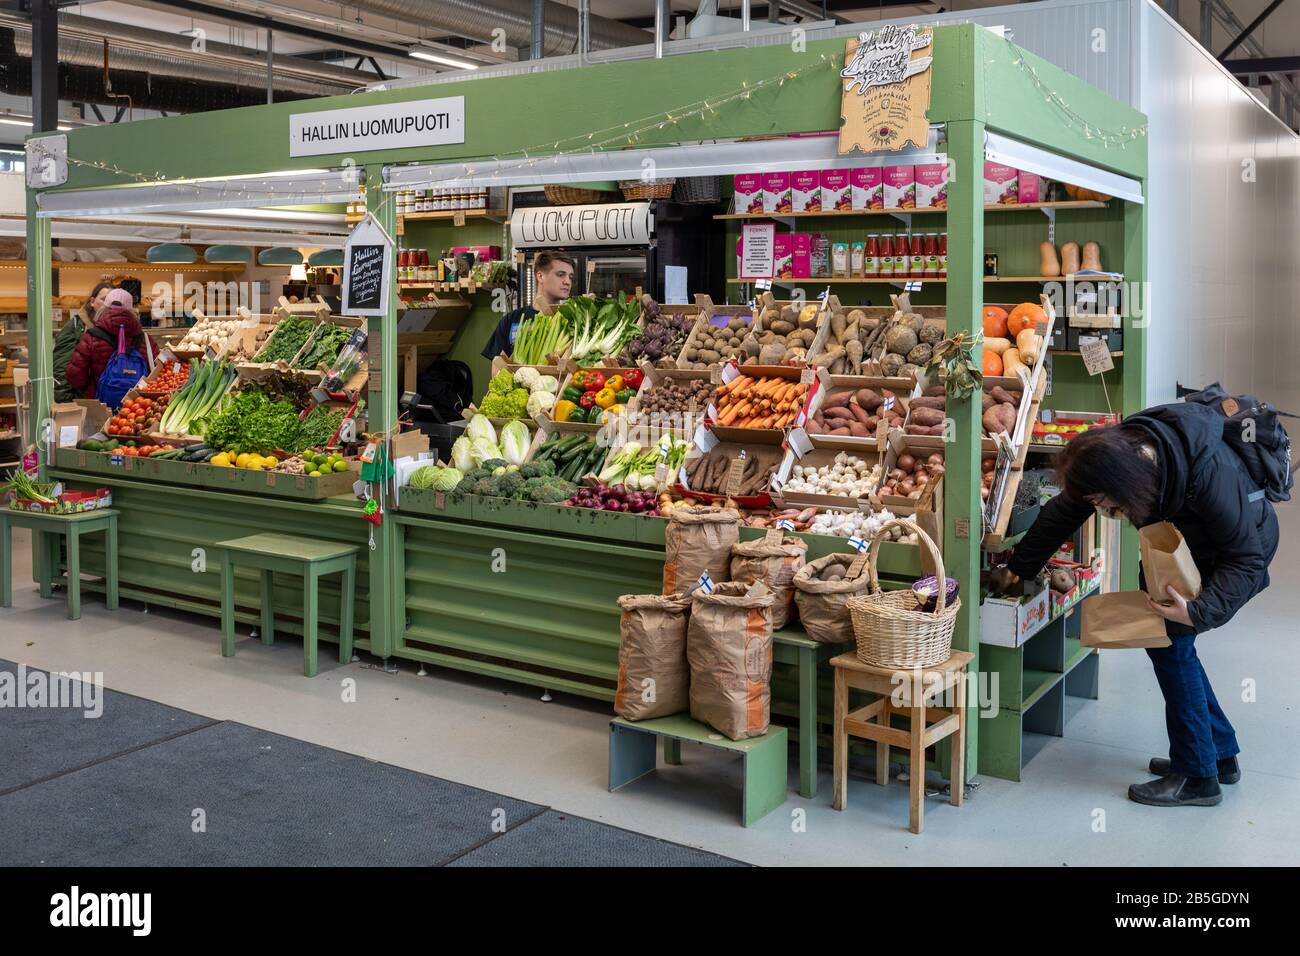 Organic vegetable vendor stall at temporary indoor-market hall in Hakaniemi district of Helsinki, Finland Stock Photo